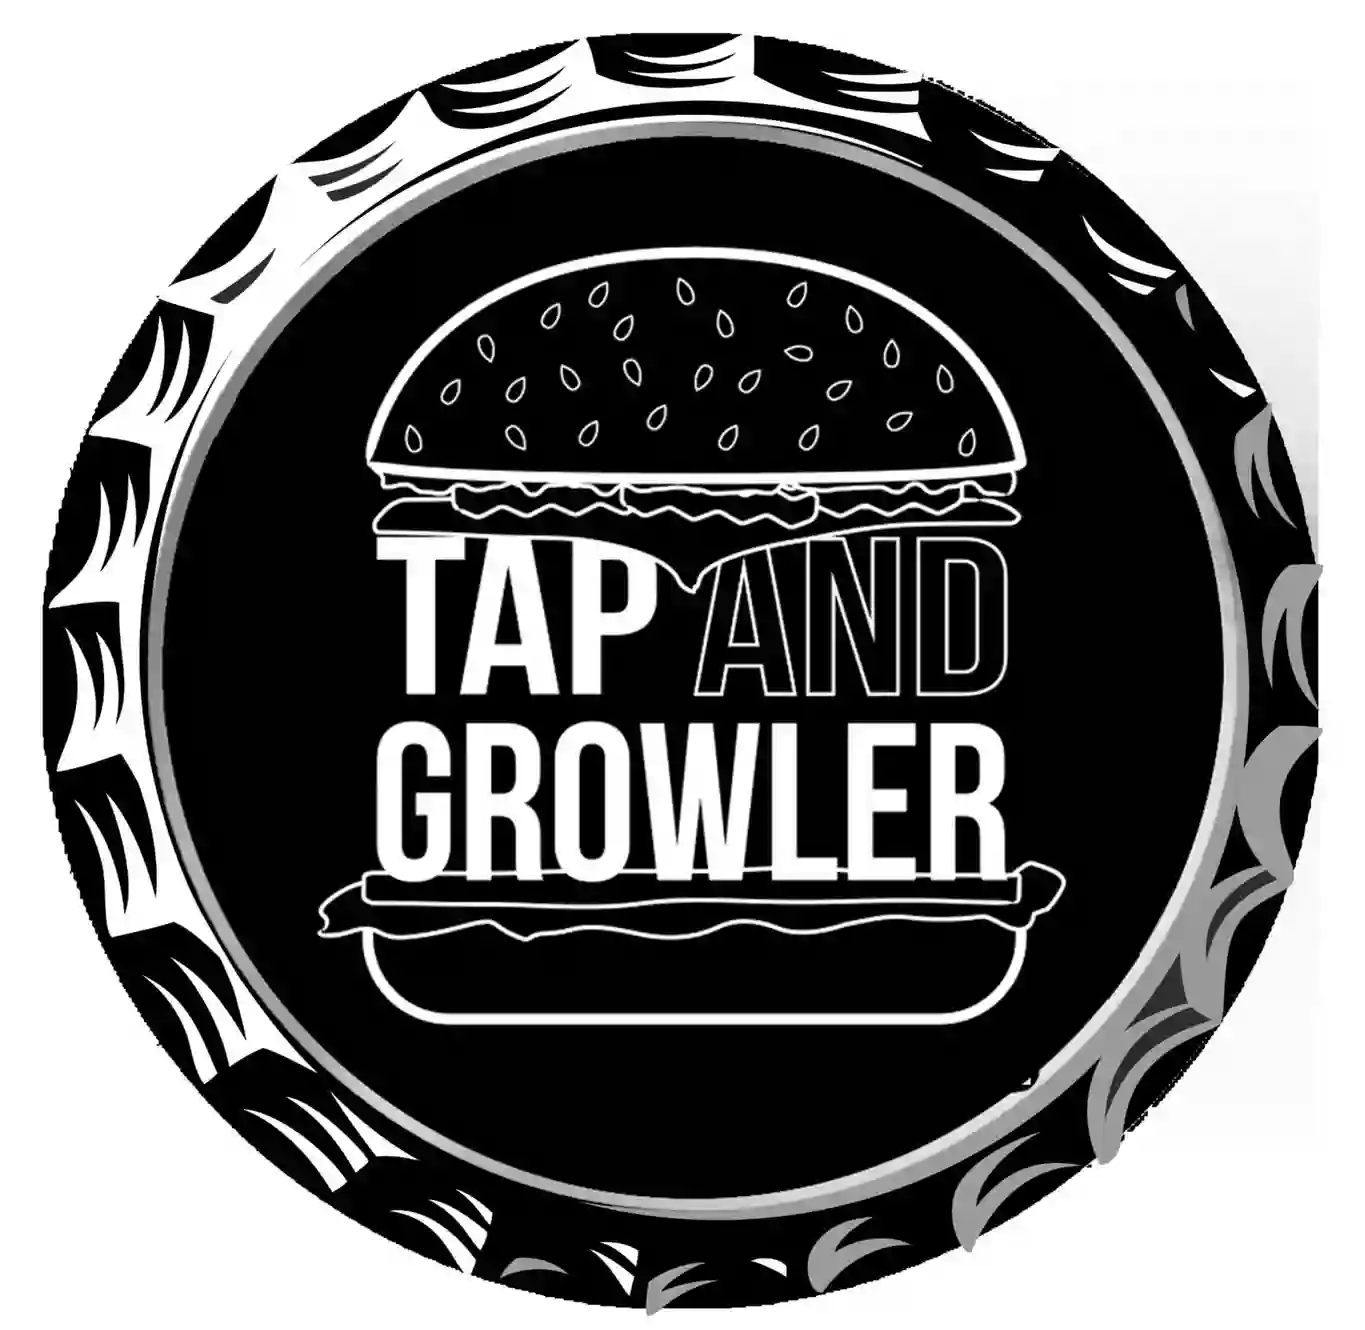 Tap And Growler Bar & Grill